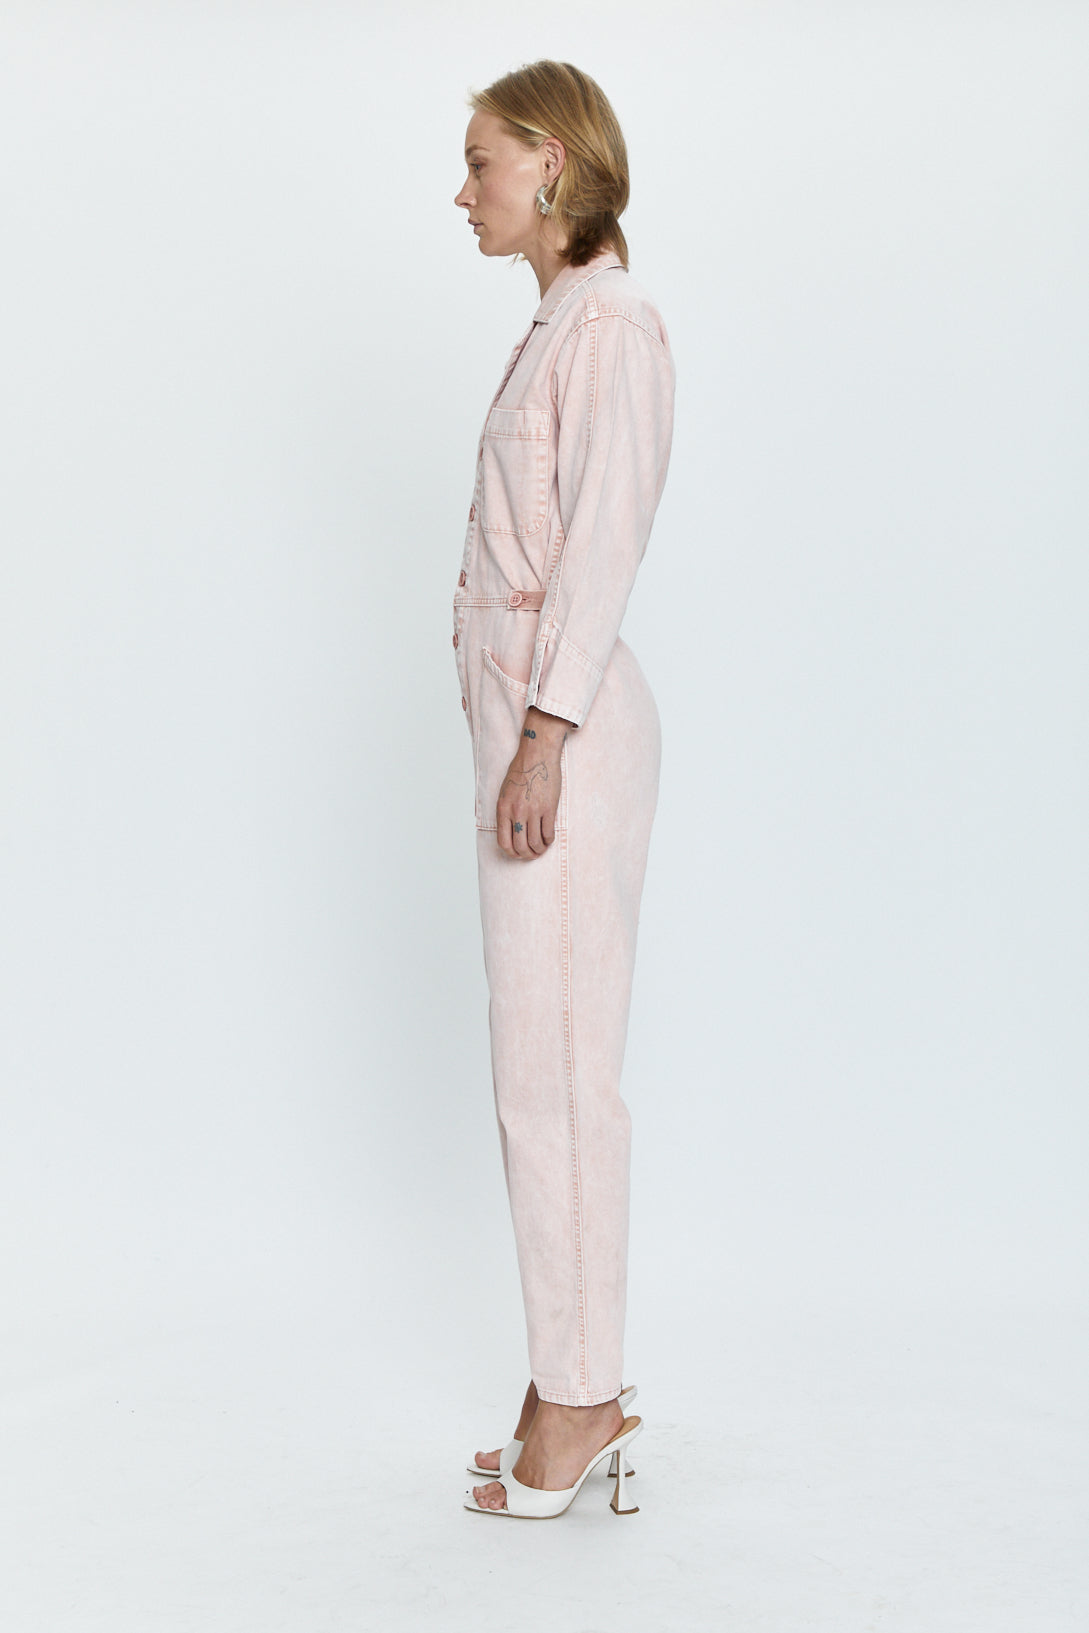 Tanner Long Sleeve Field Suit - Mellow Rose Snow
            
              Sale